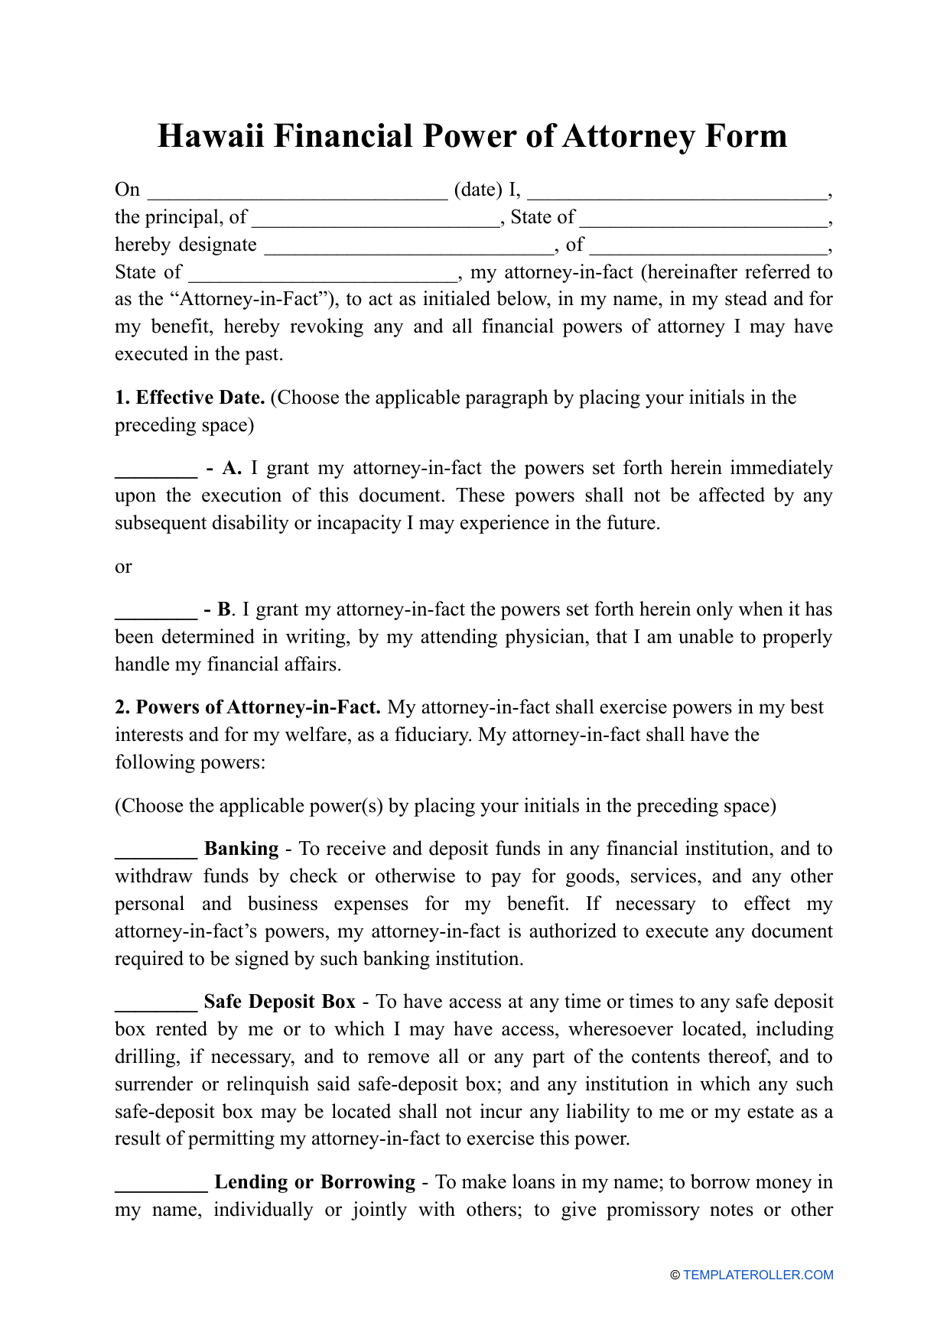 Financial Power of Attorney Form - Hawaii, Page 1